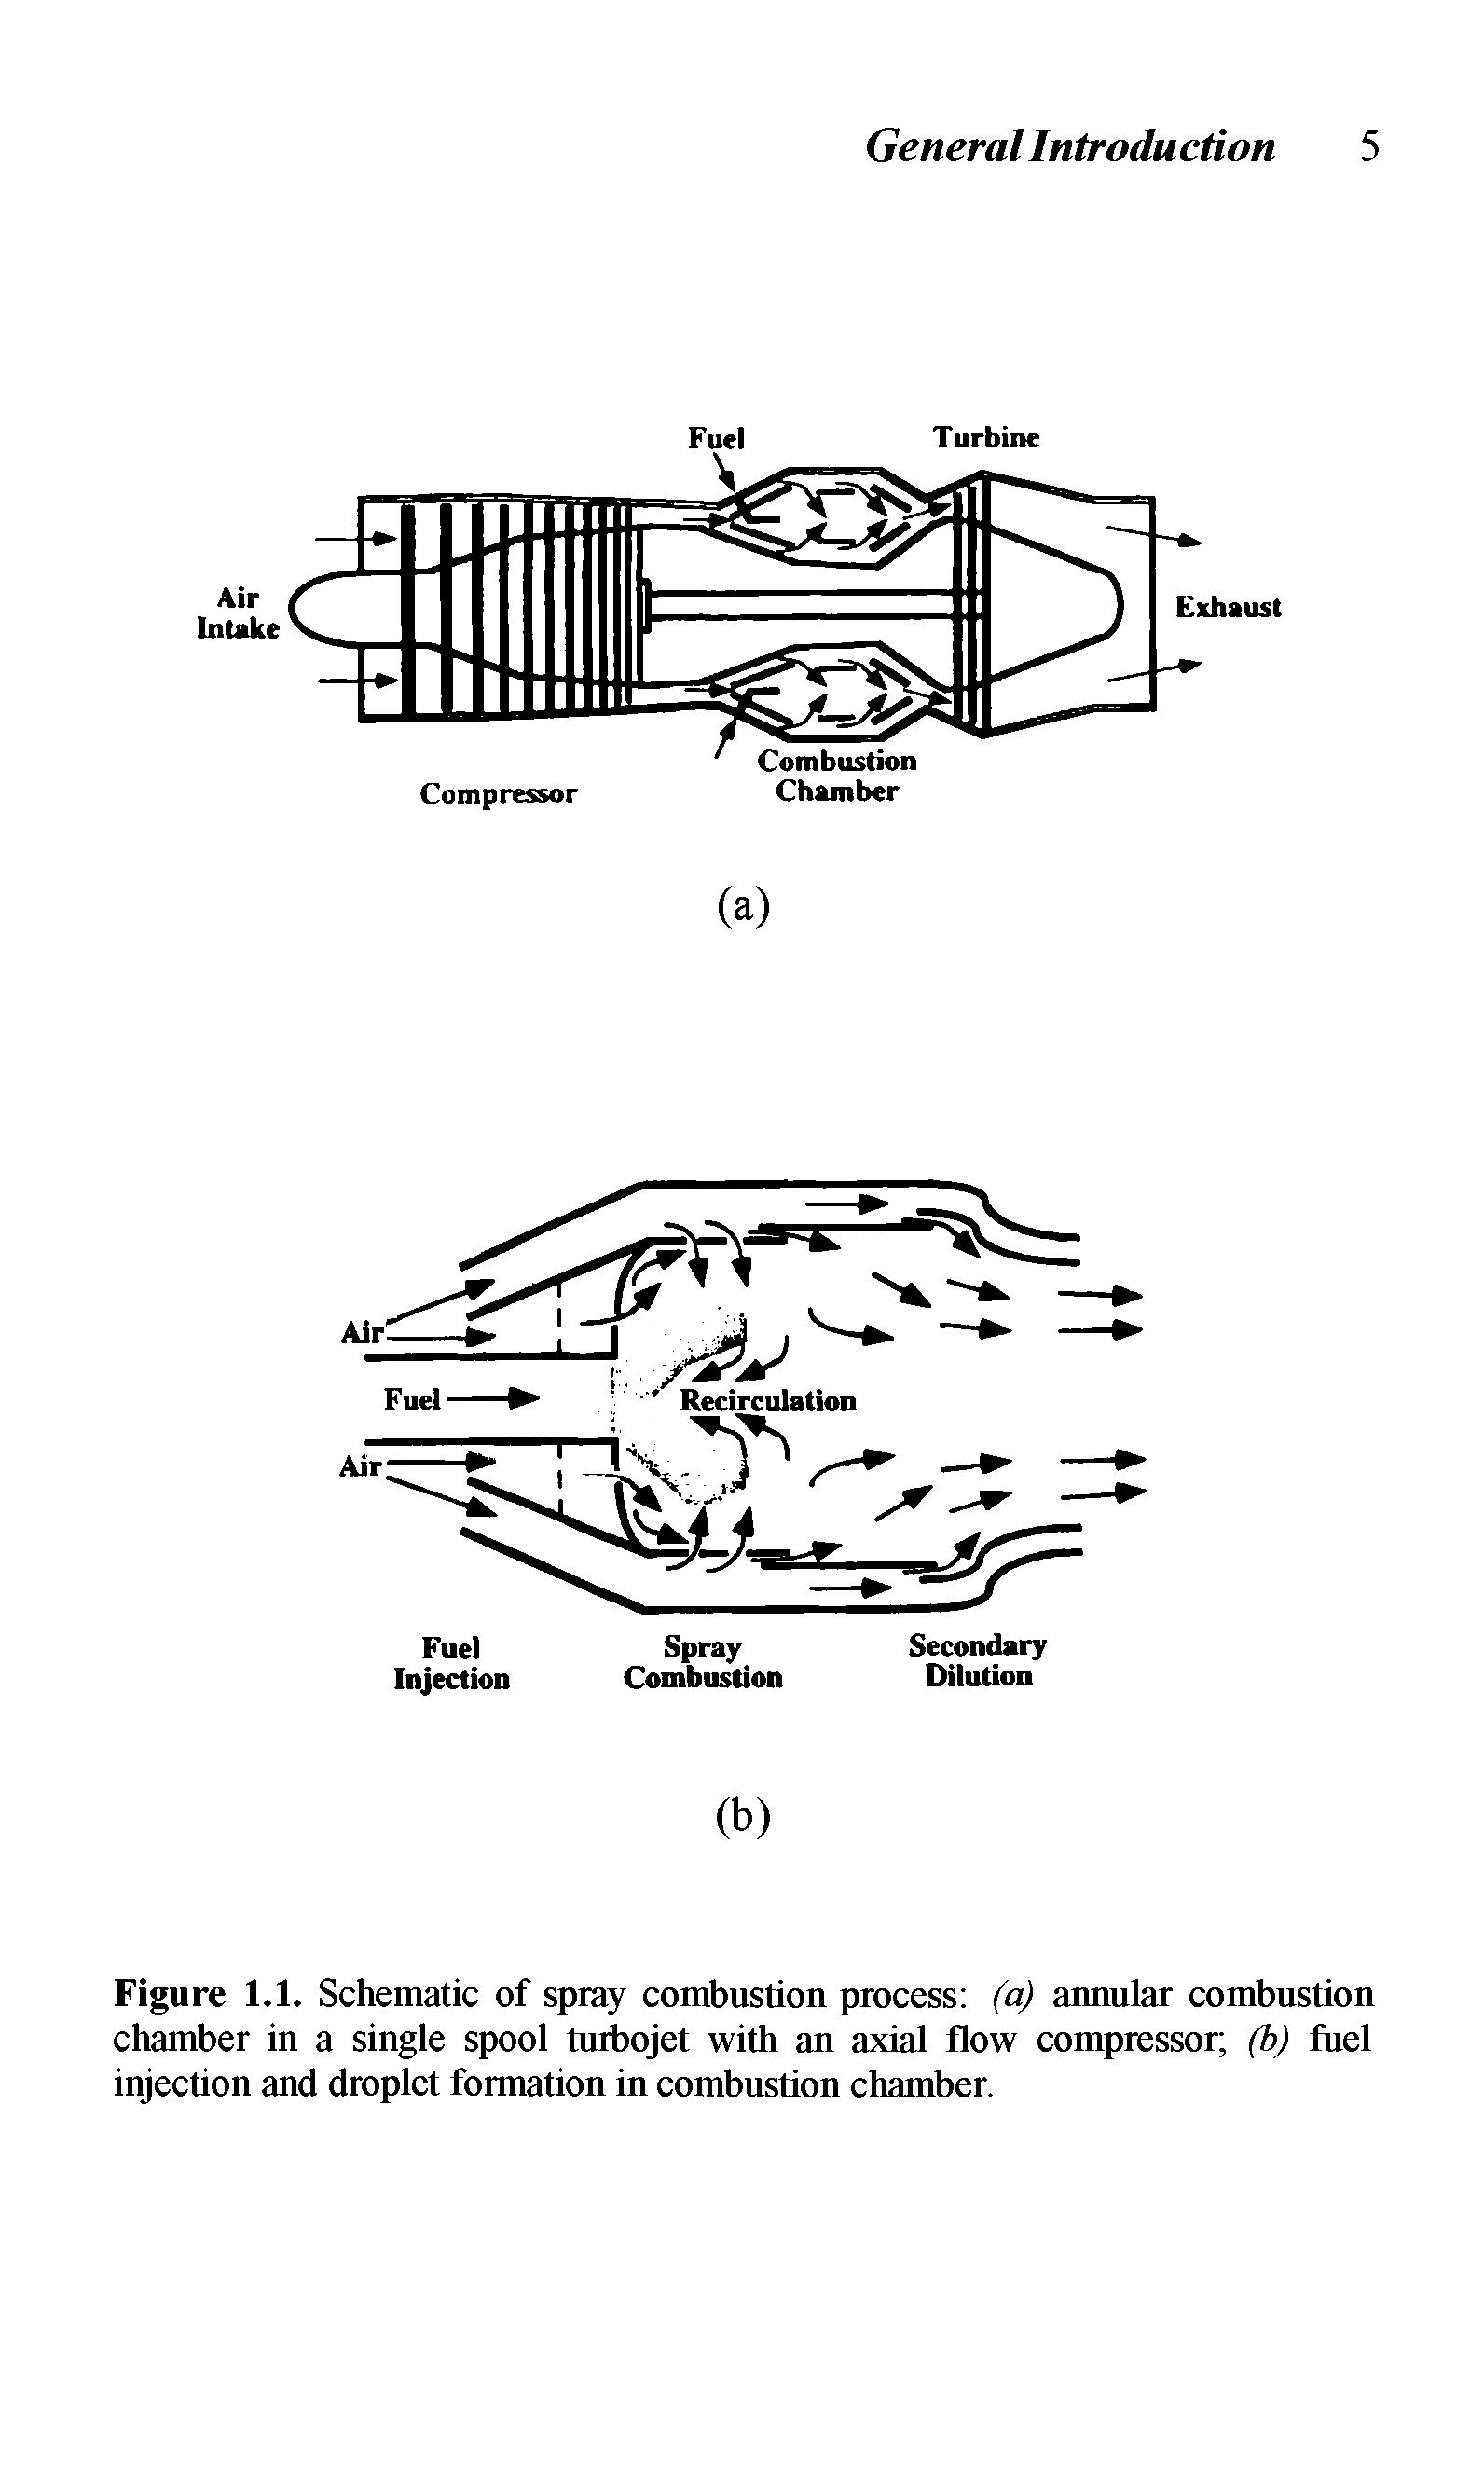 Figure 1.1. Schematic of spray combustion process (a) annular combustion chamber in a single spool turbojet with an axial flow compressor (b) fuel injection and droplet formation in combustion chamber.